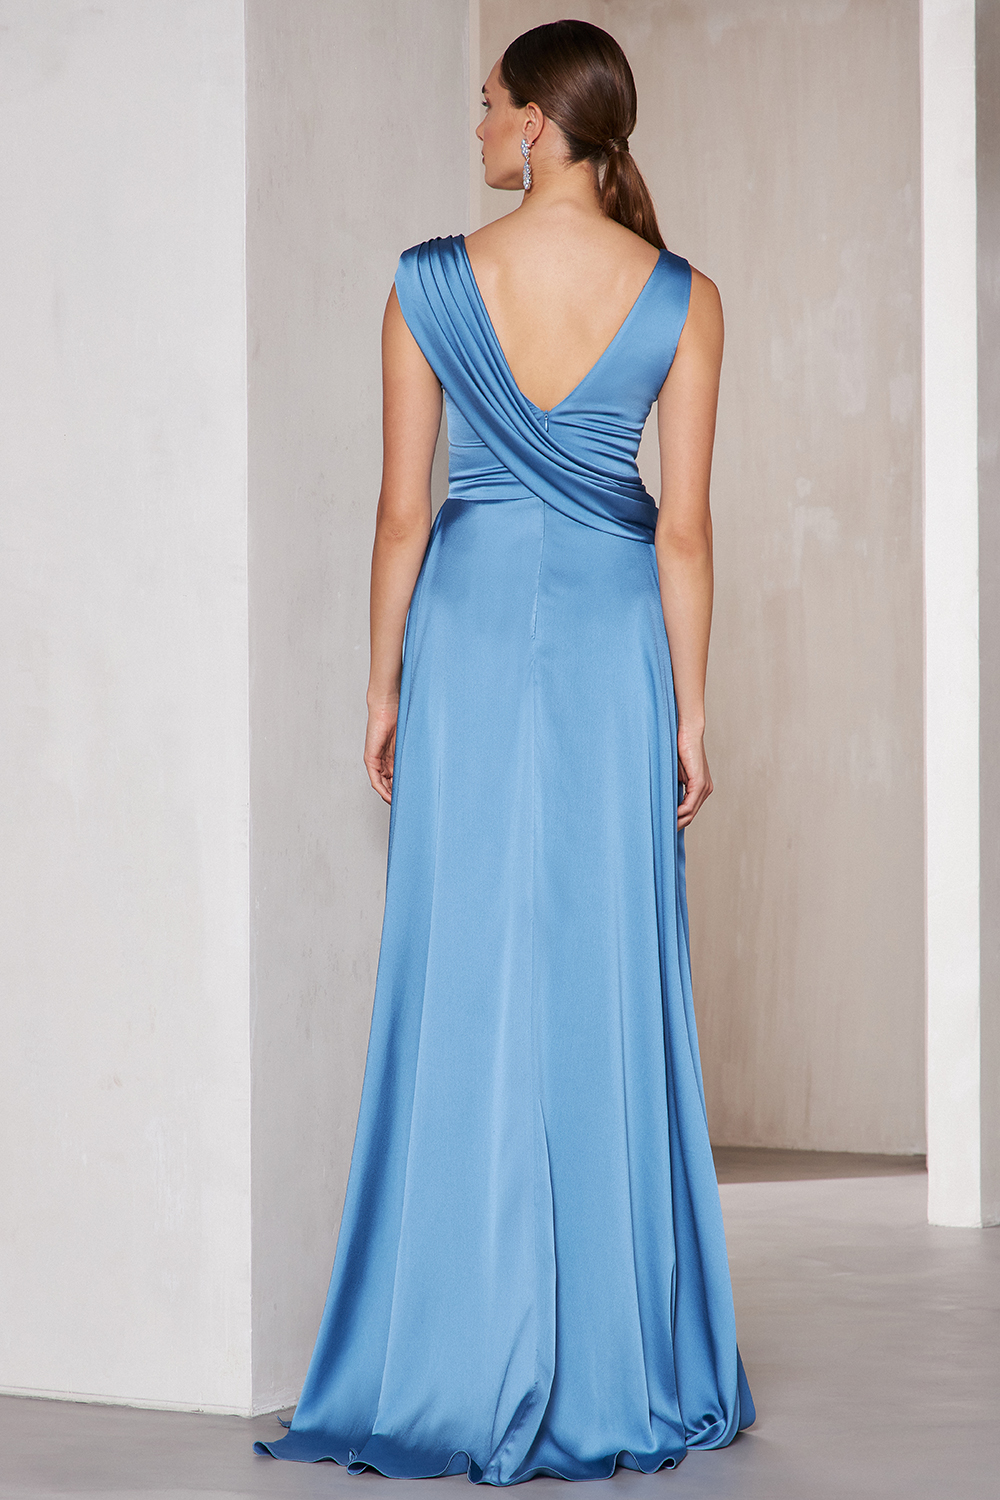 Cocktail Dresses / Long cocktail satin dress with wide straps